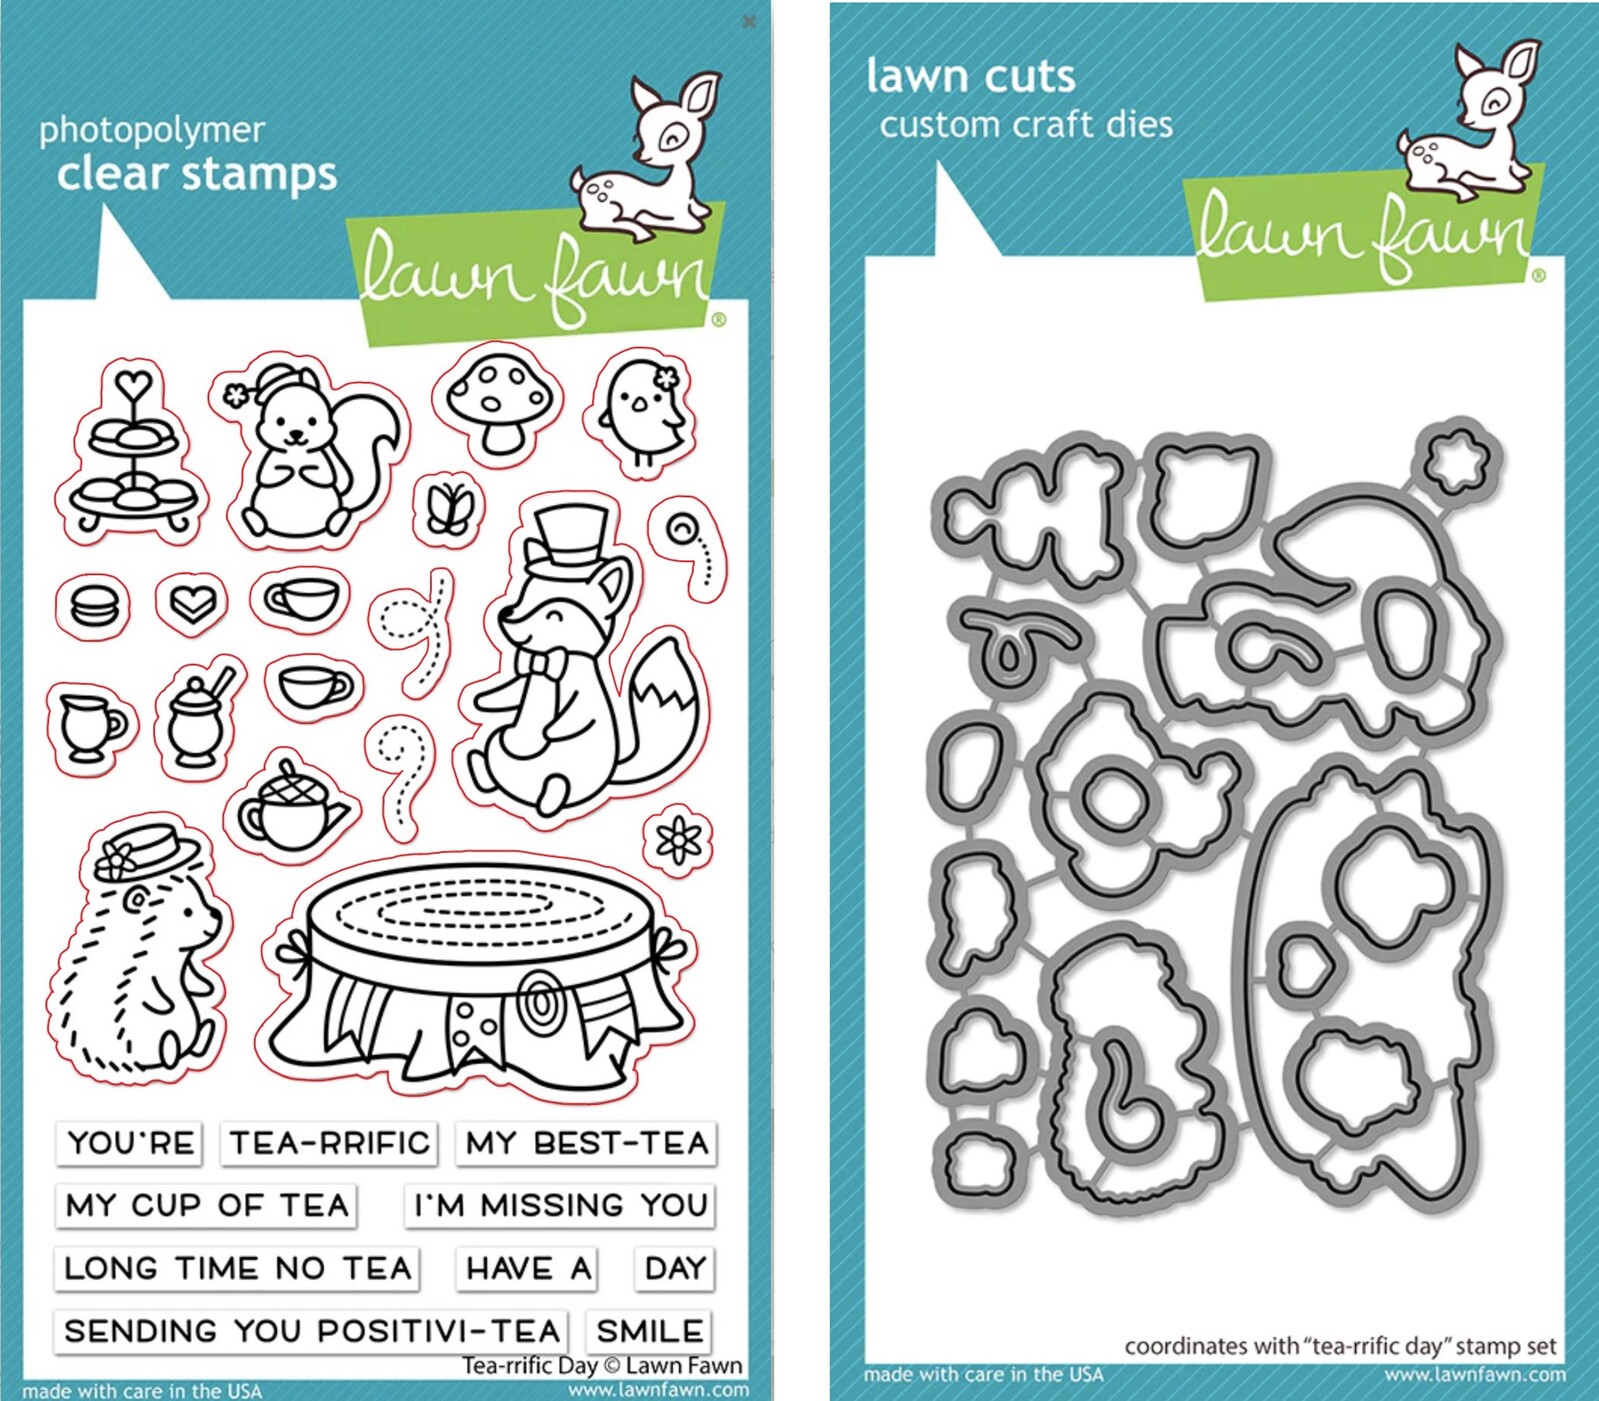 Lawn Fawn Tea-Riffic Day Stamp and Die Bundle